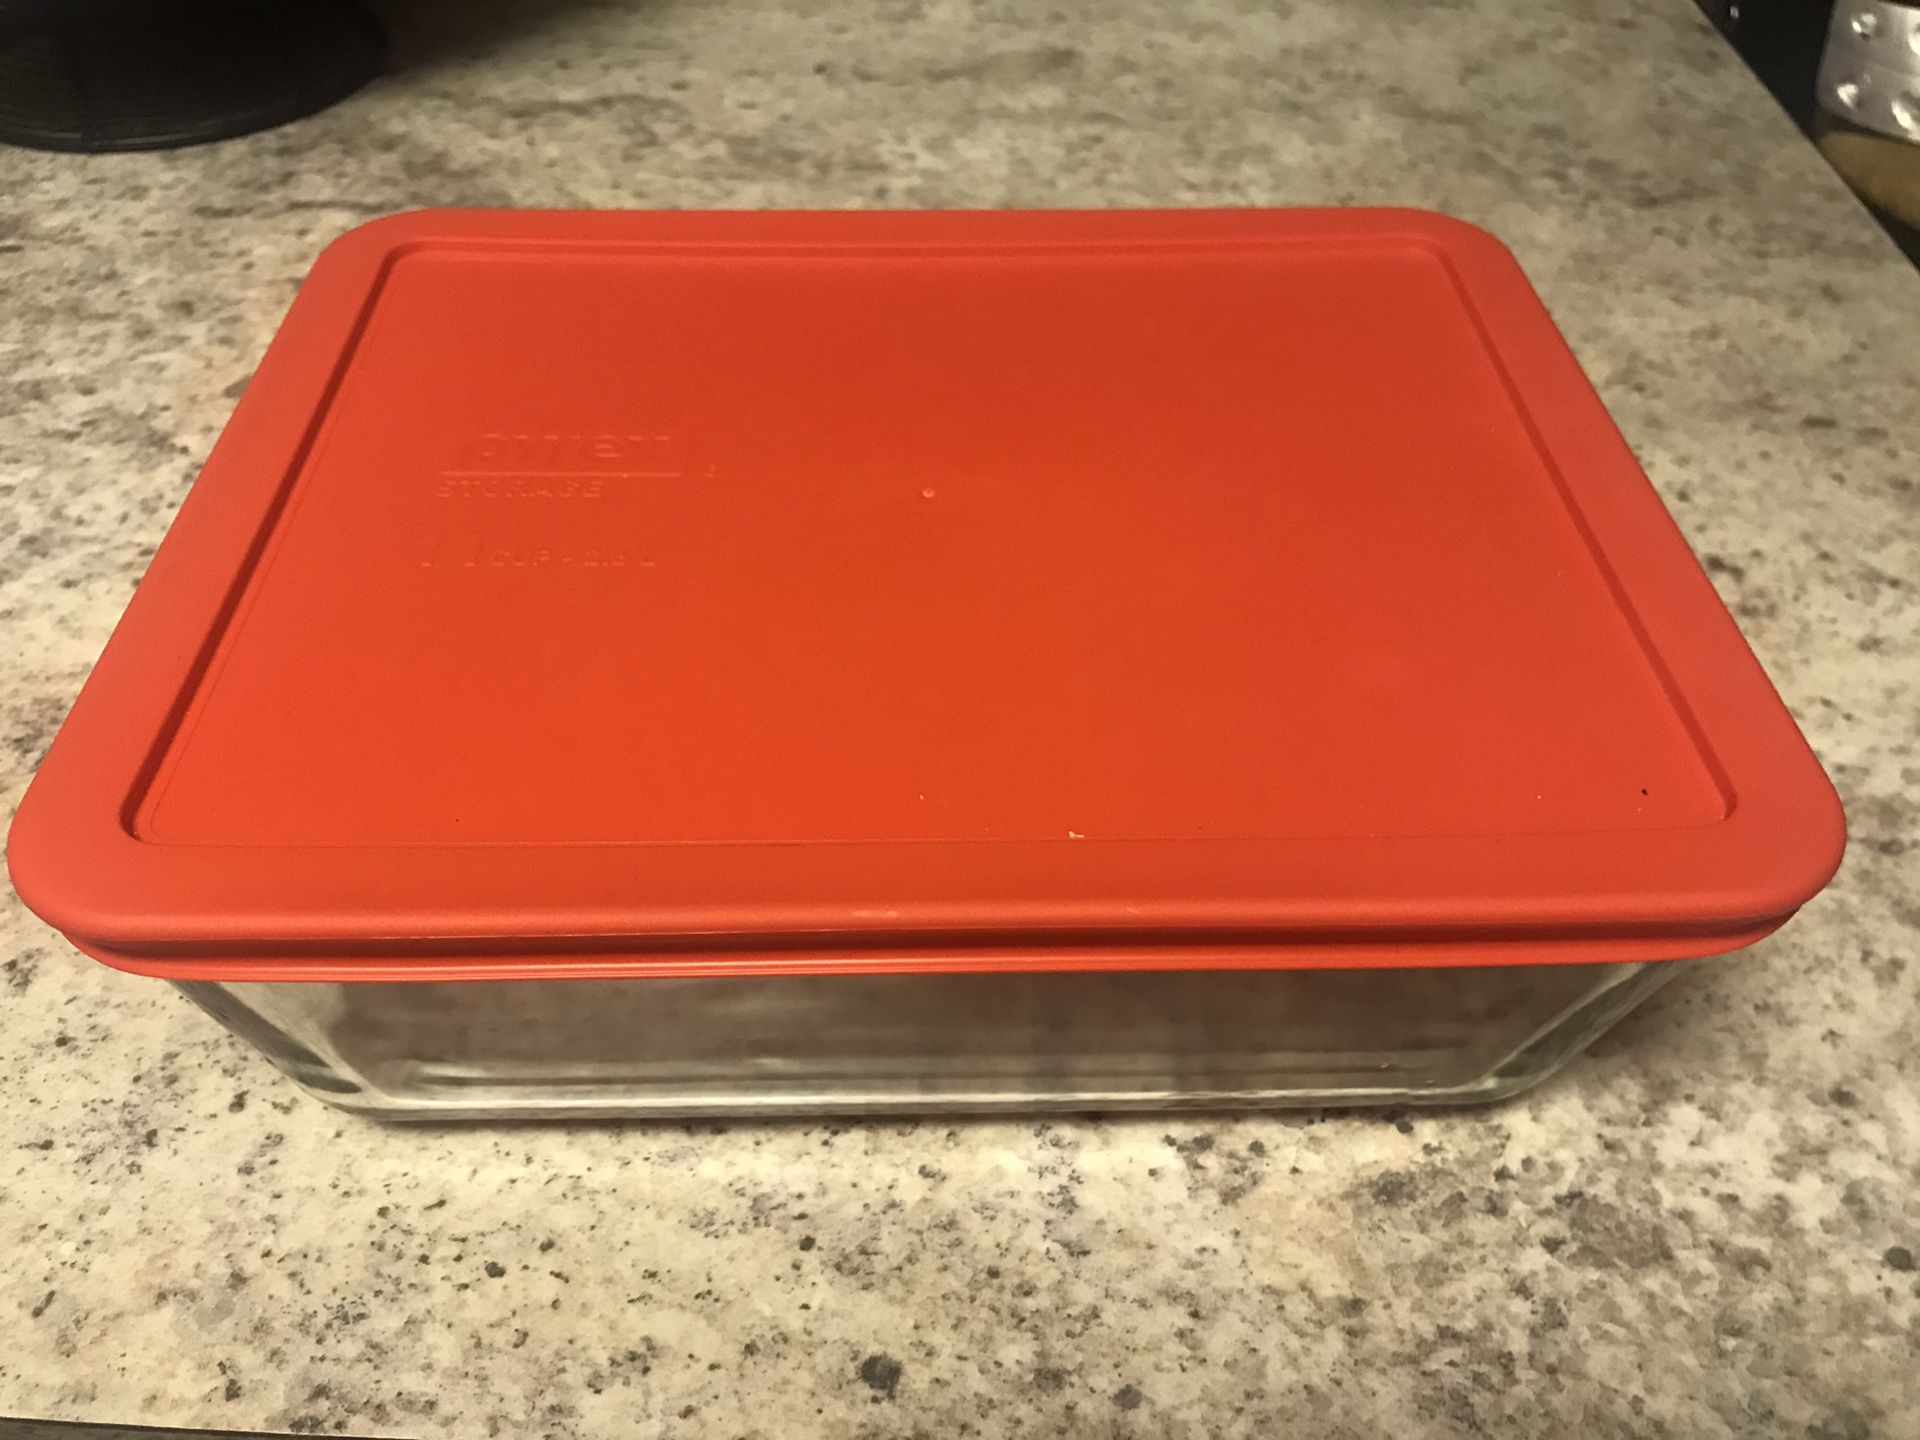 Pyrex - never used. New!